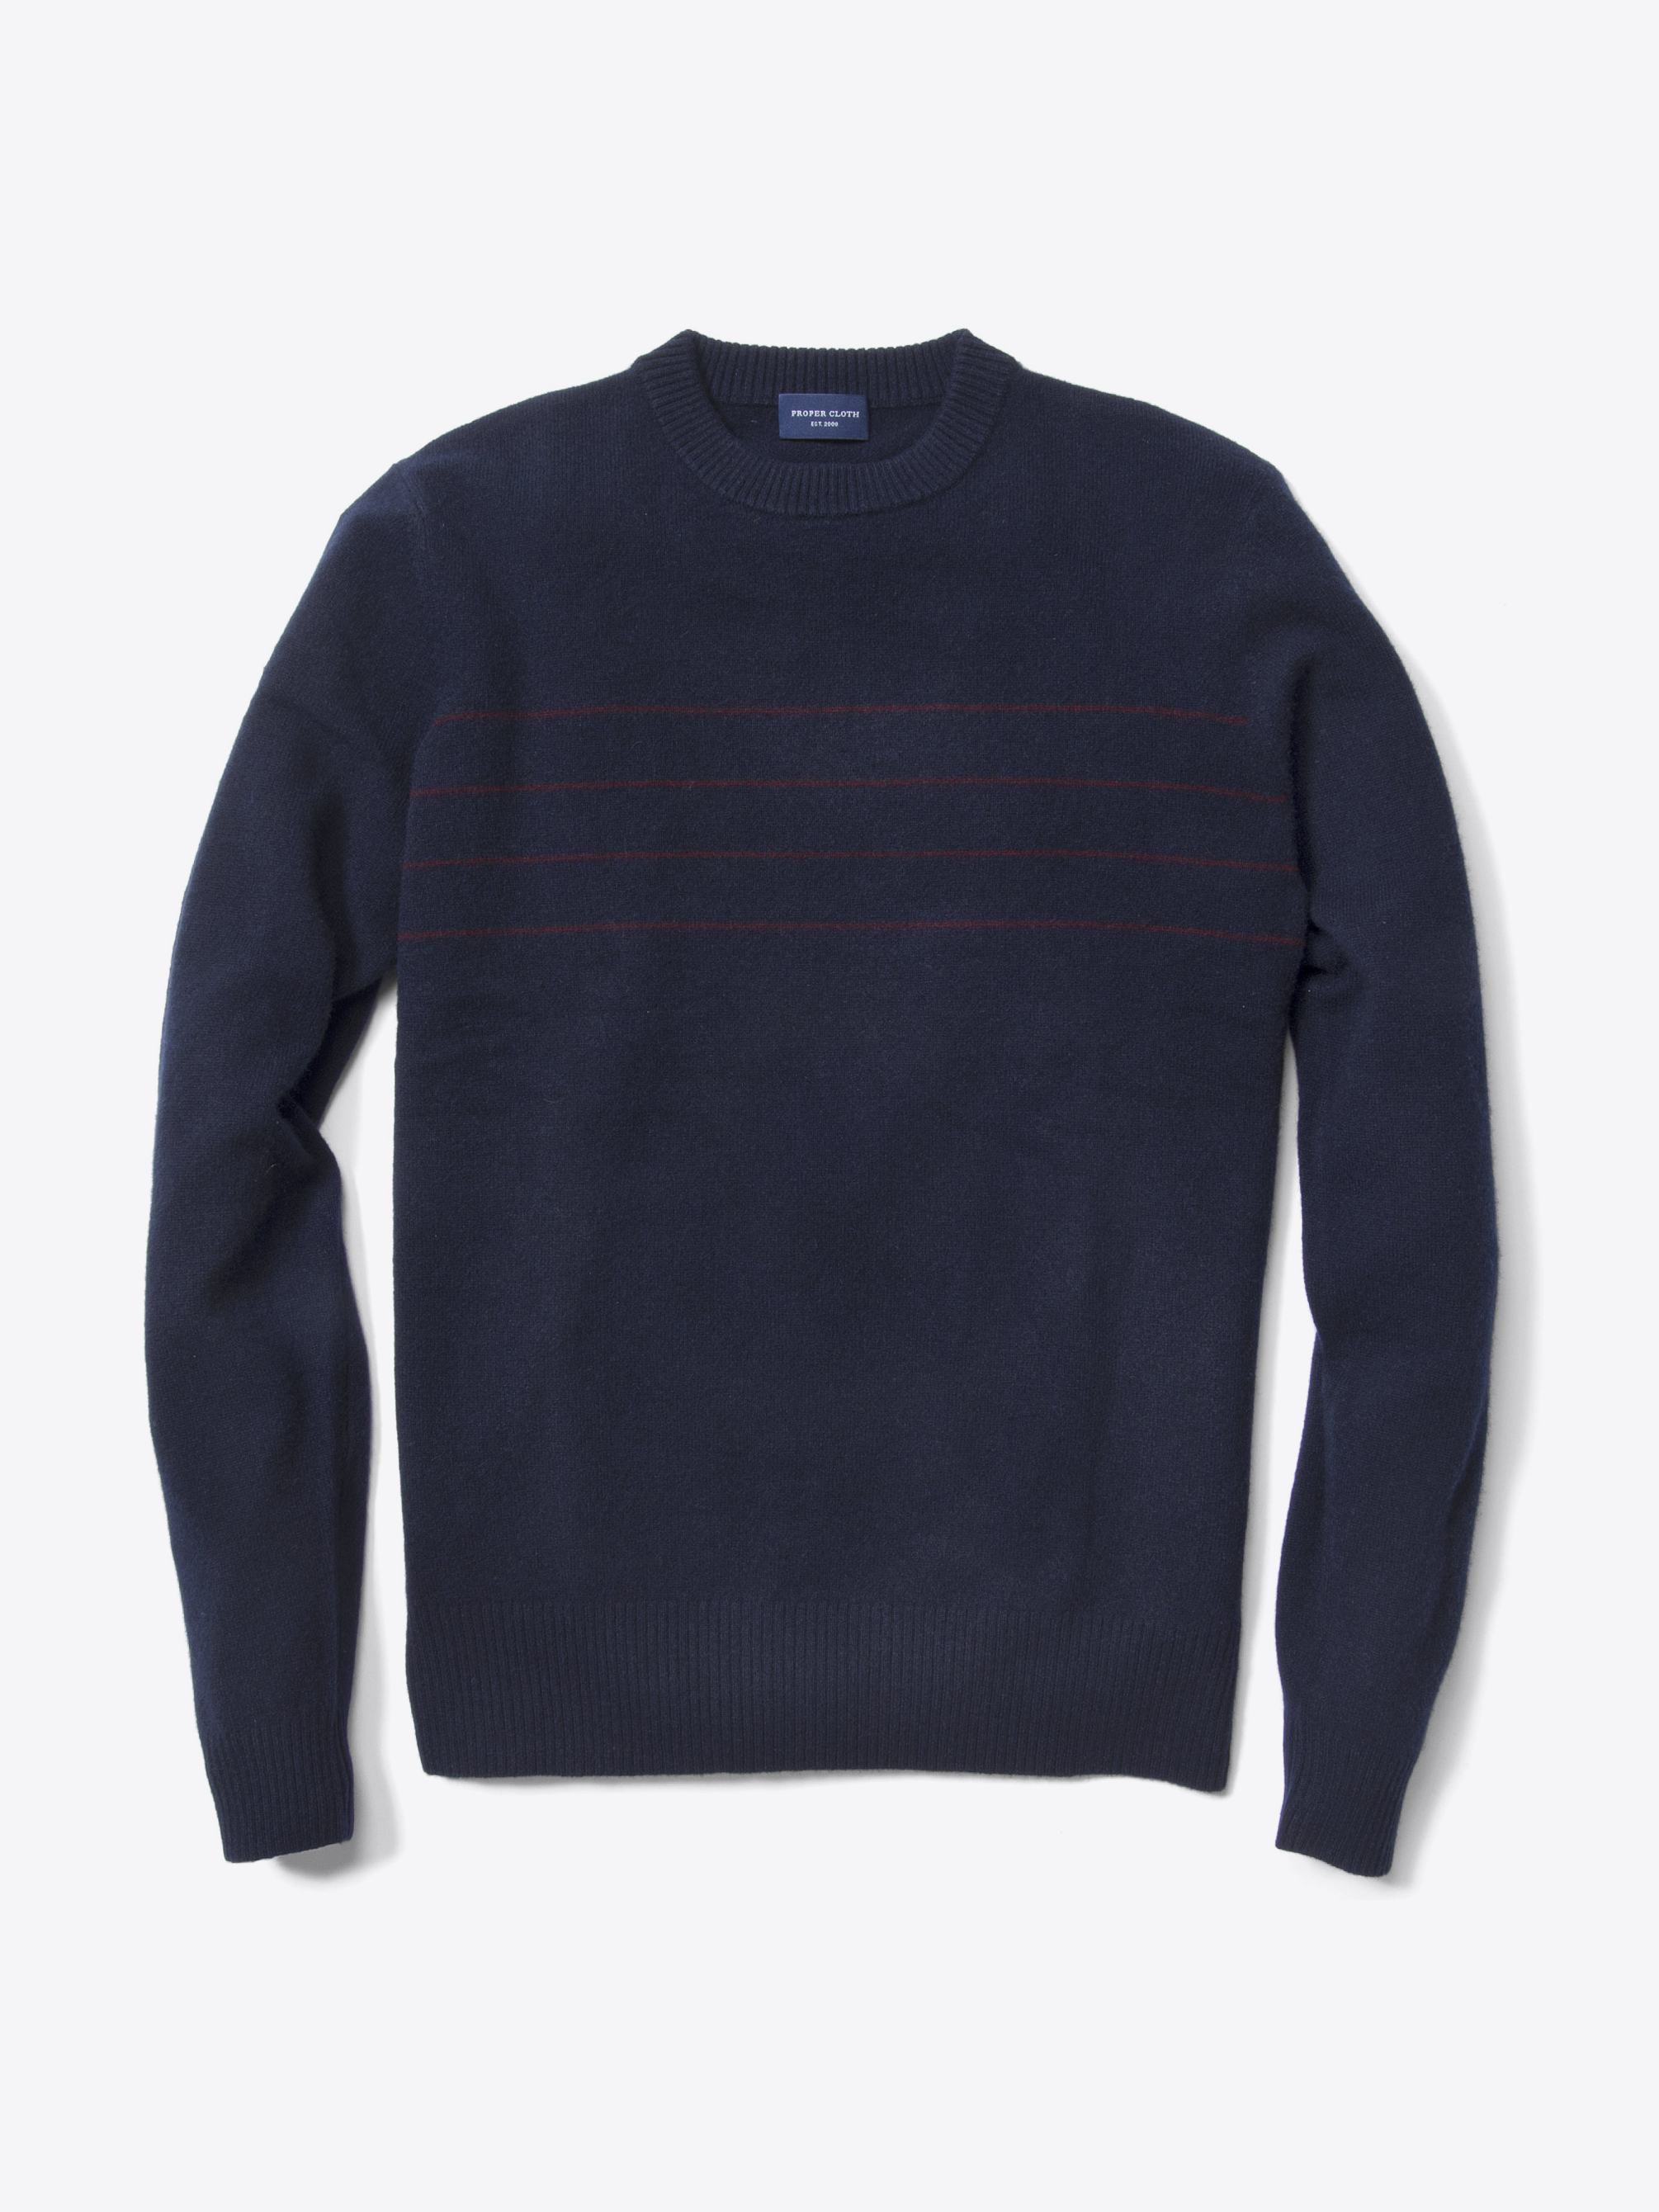 Zoom Image of Navy and Red Stripe Cashmere Sweater